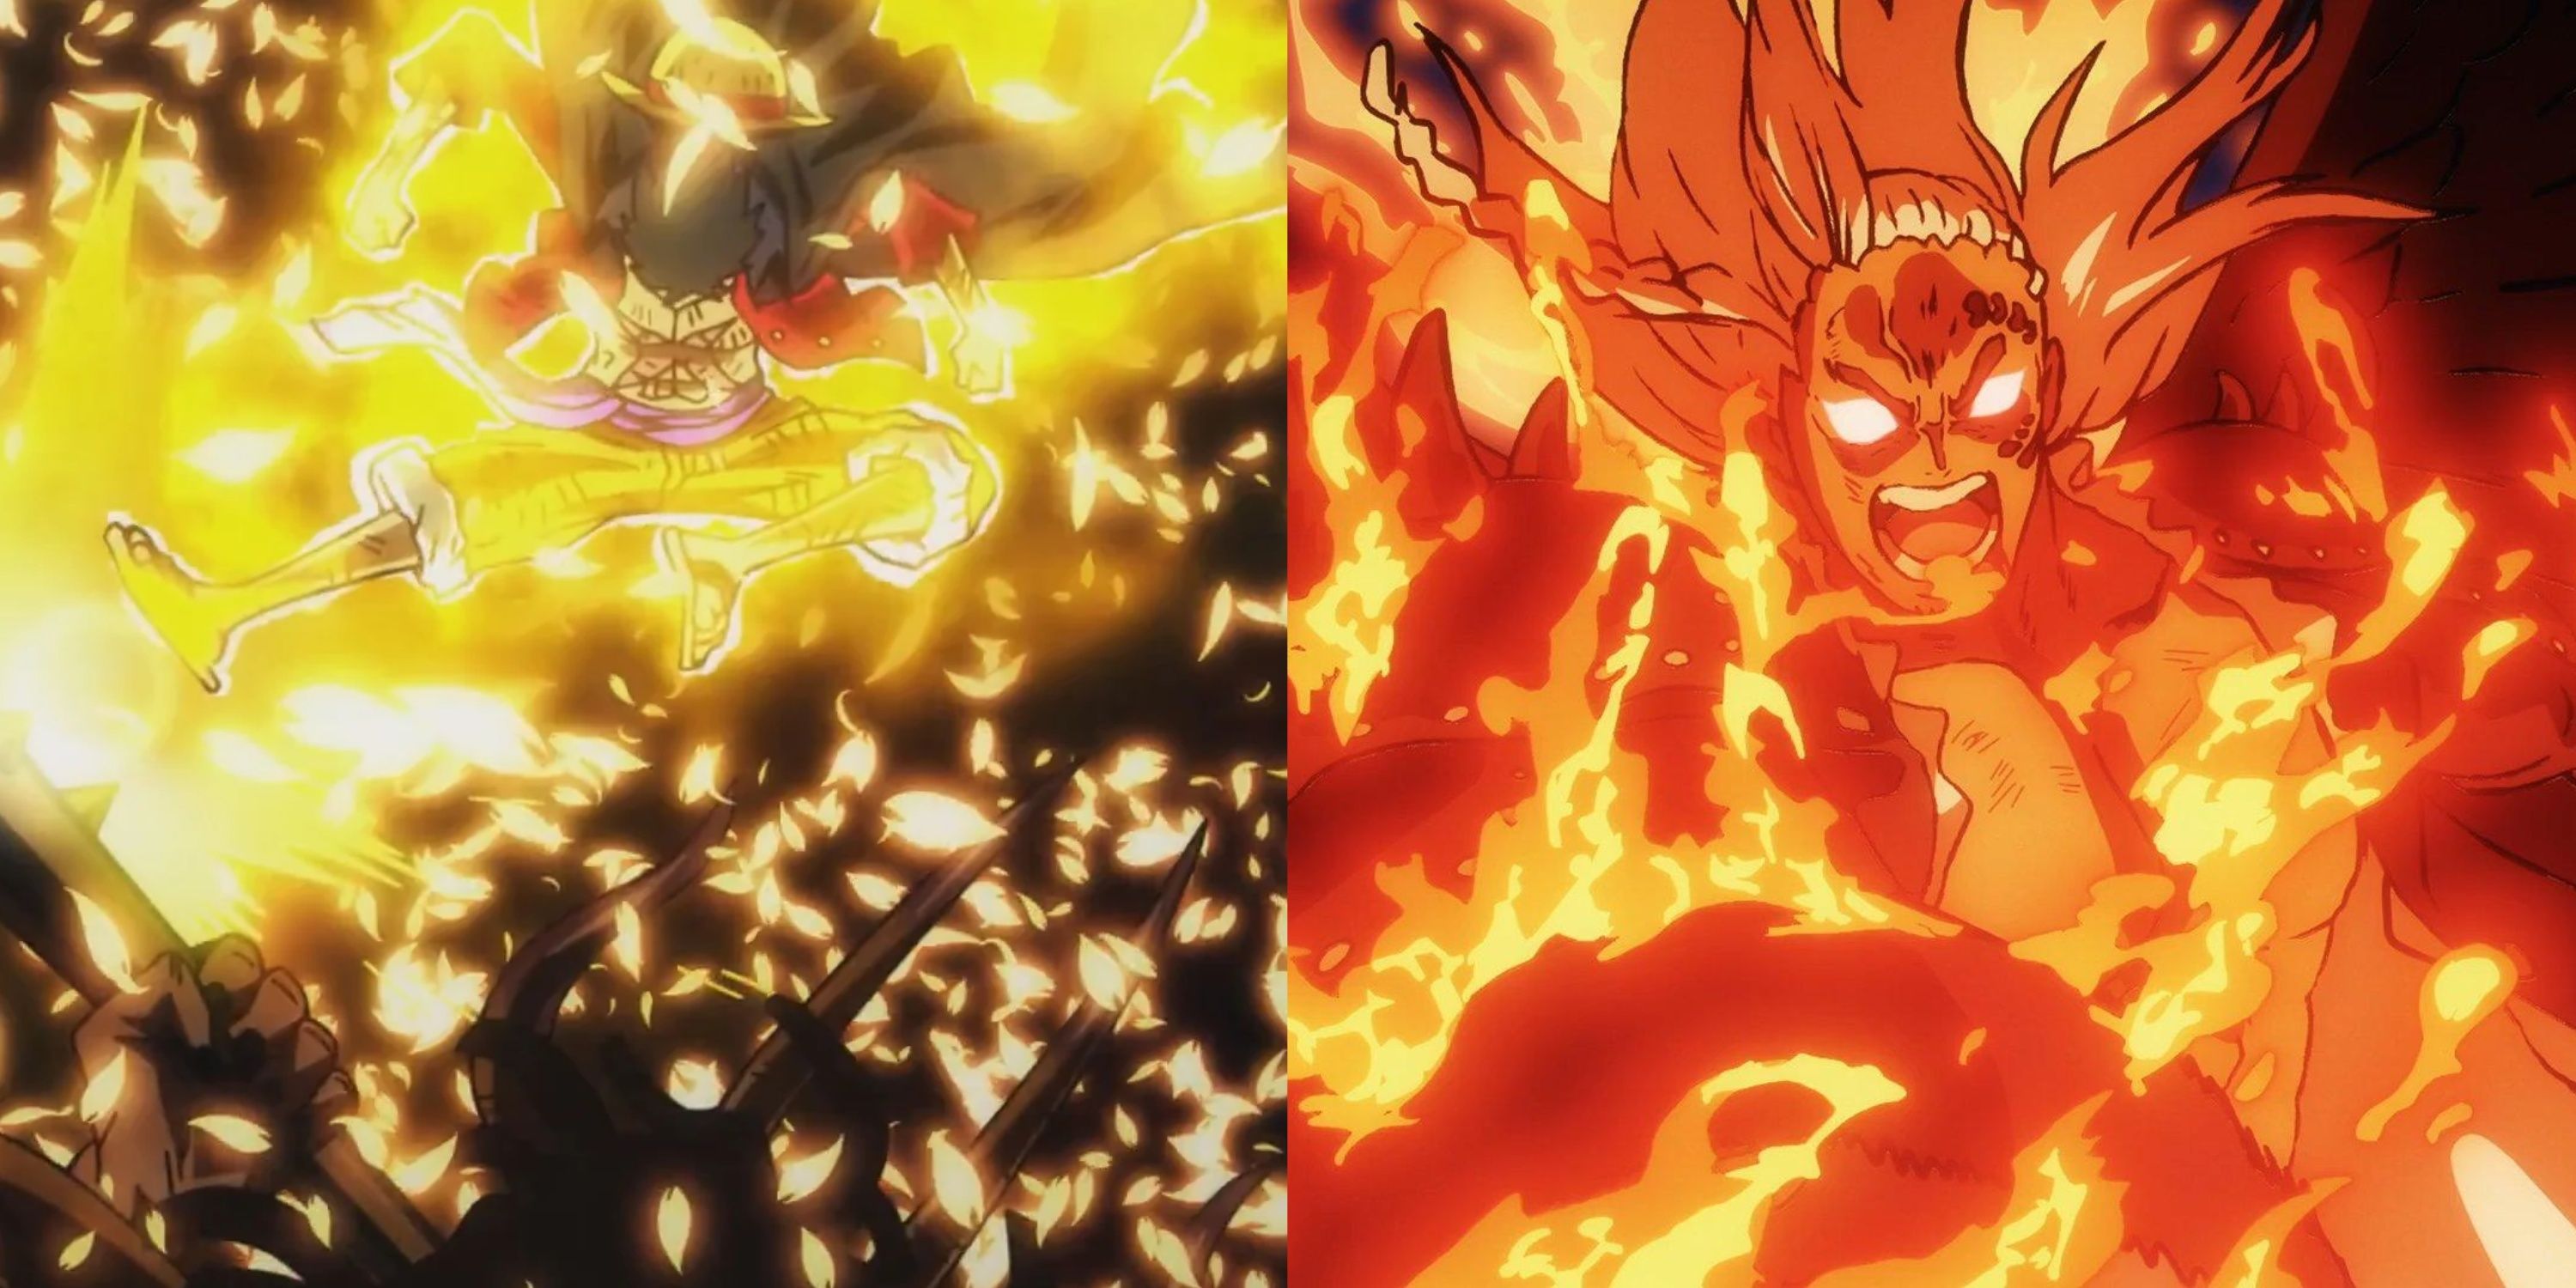 Monkey D. Luffy and King the Conflagration during the events of One Piece's Wano Country Arc